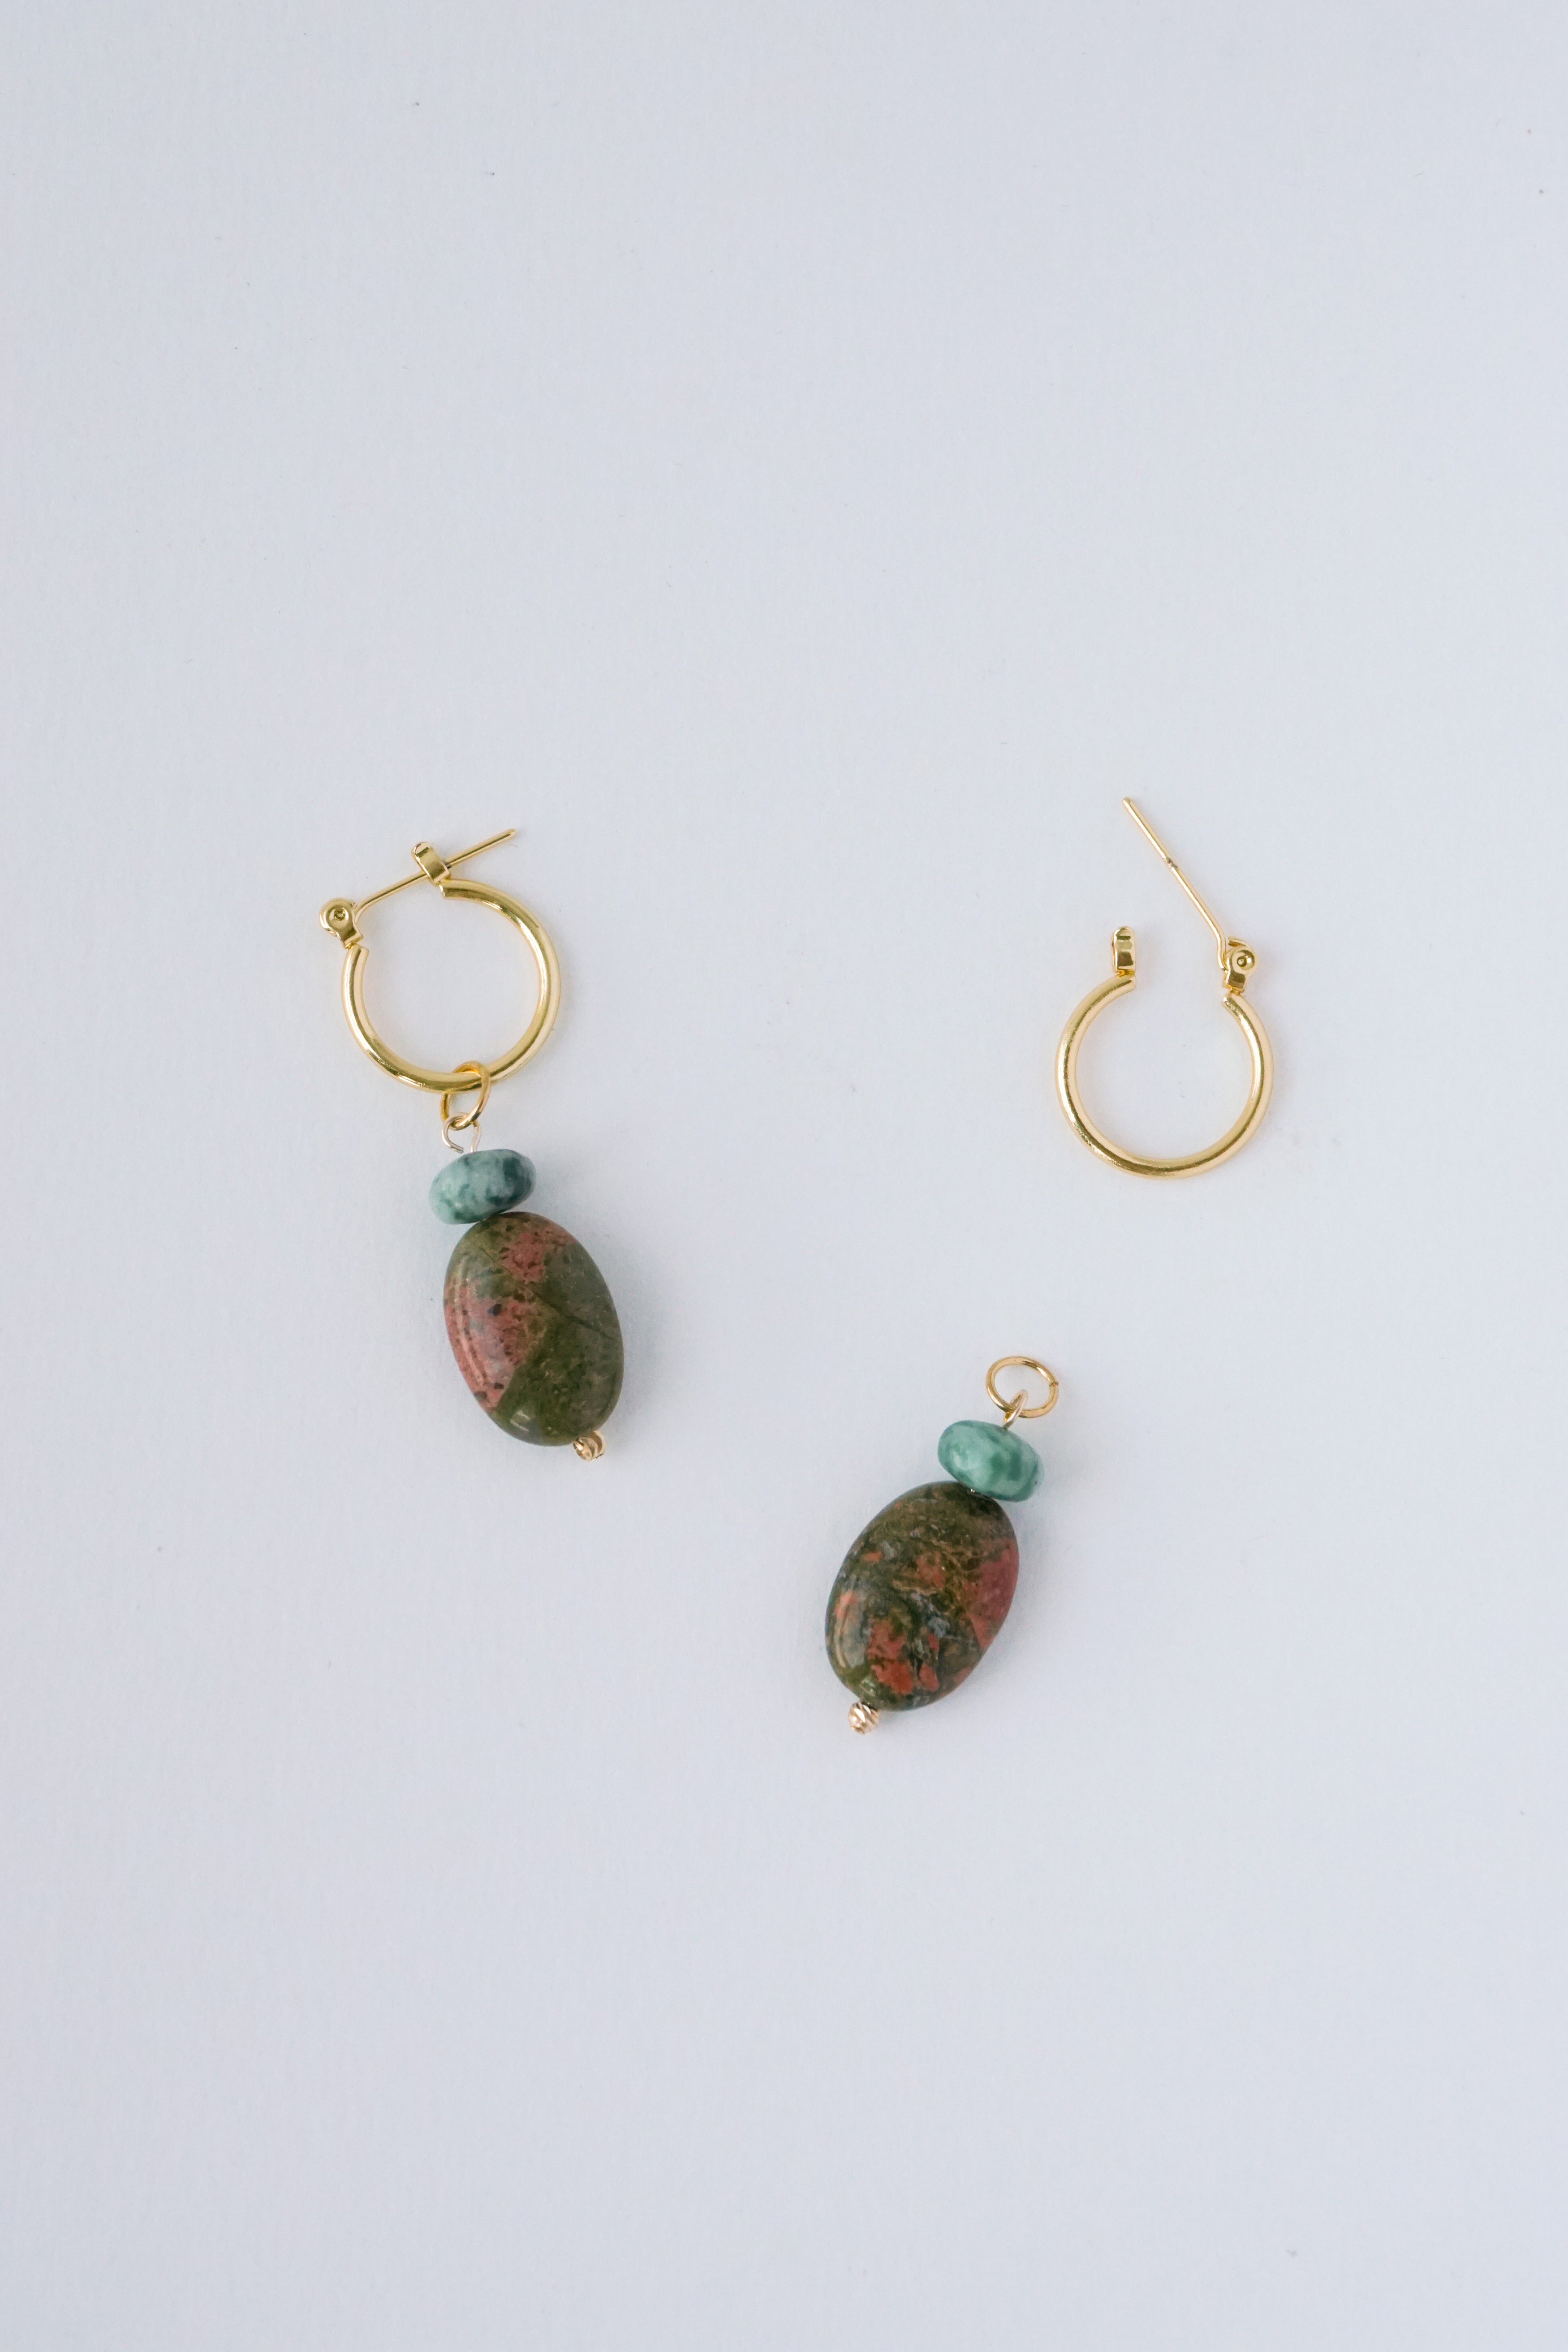 Sequoia Charms - Unakite x African Jade